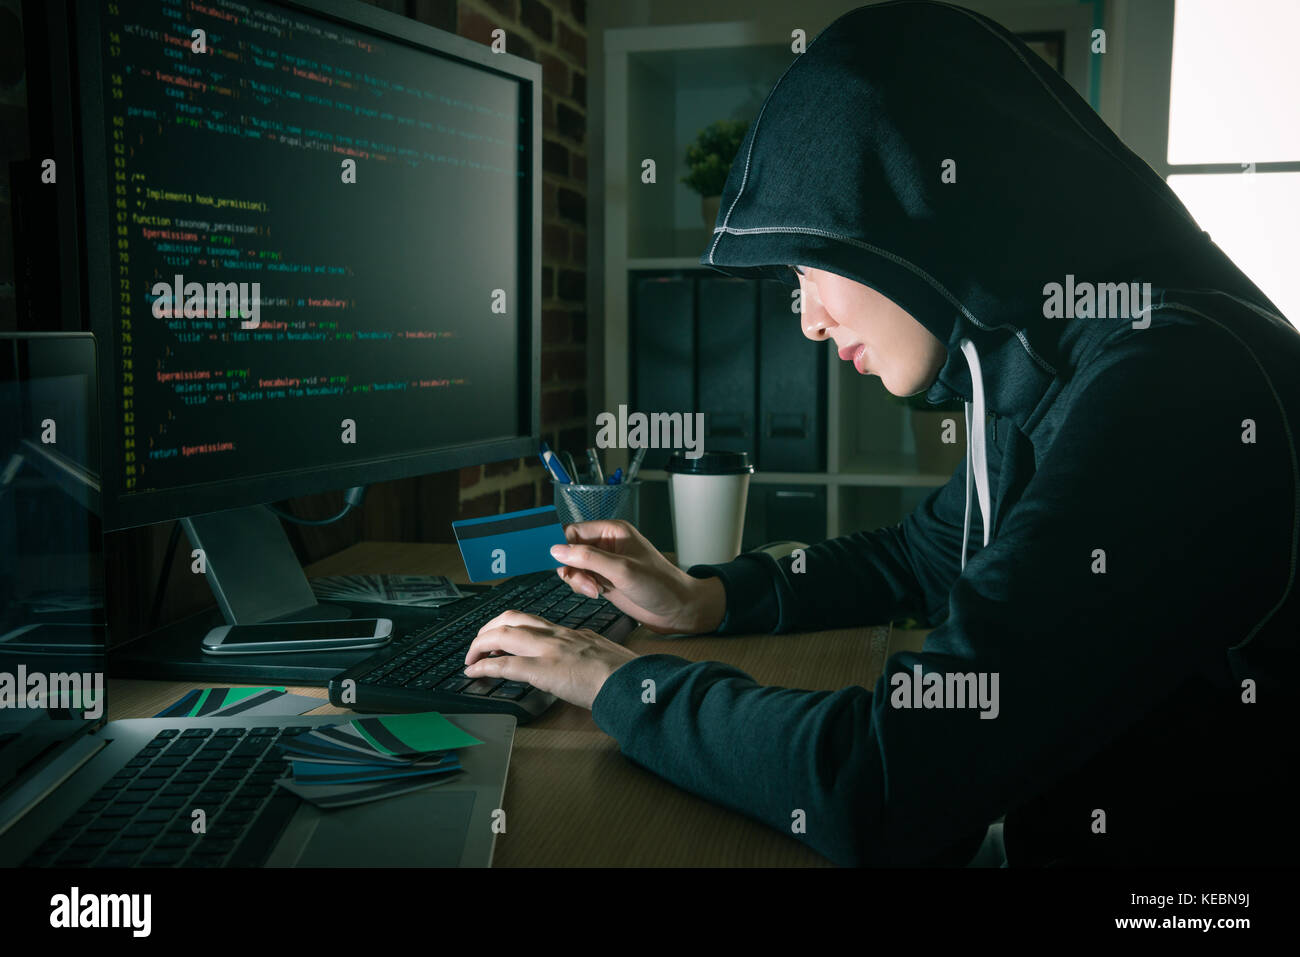 evil pretty woman hacker stealing personal identity credit card information and using account making trading through online data code. Stock Photo